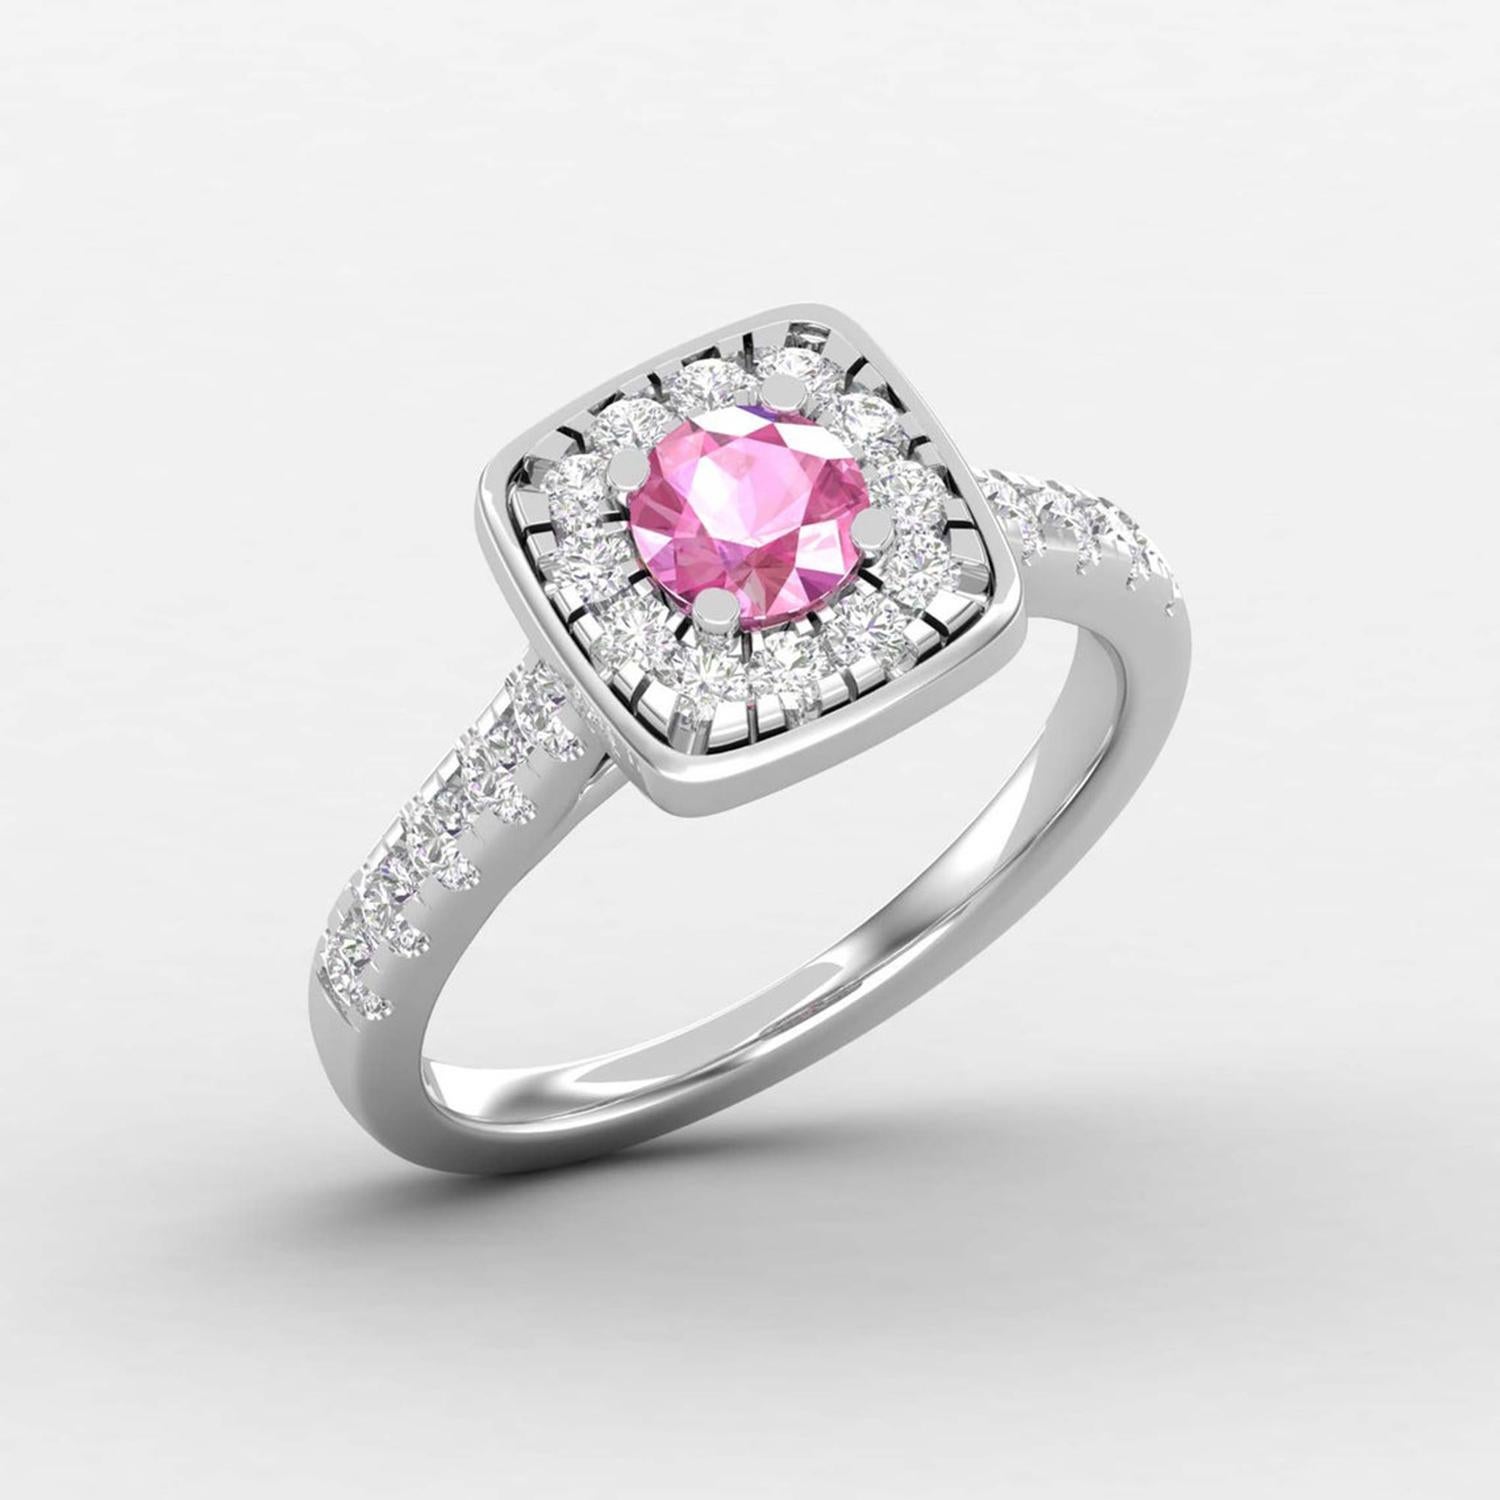 Round Cut 14 Karat Gold Round Pink Sapphire Ring / Diamond Ring / Solitaire Ring For Sale